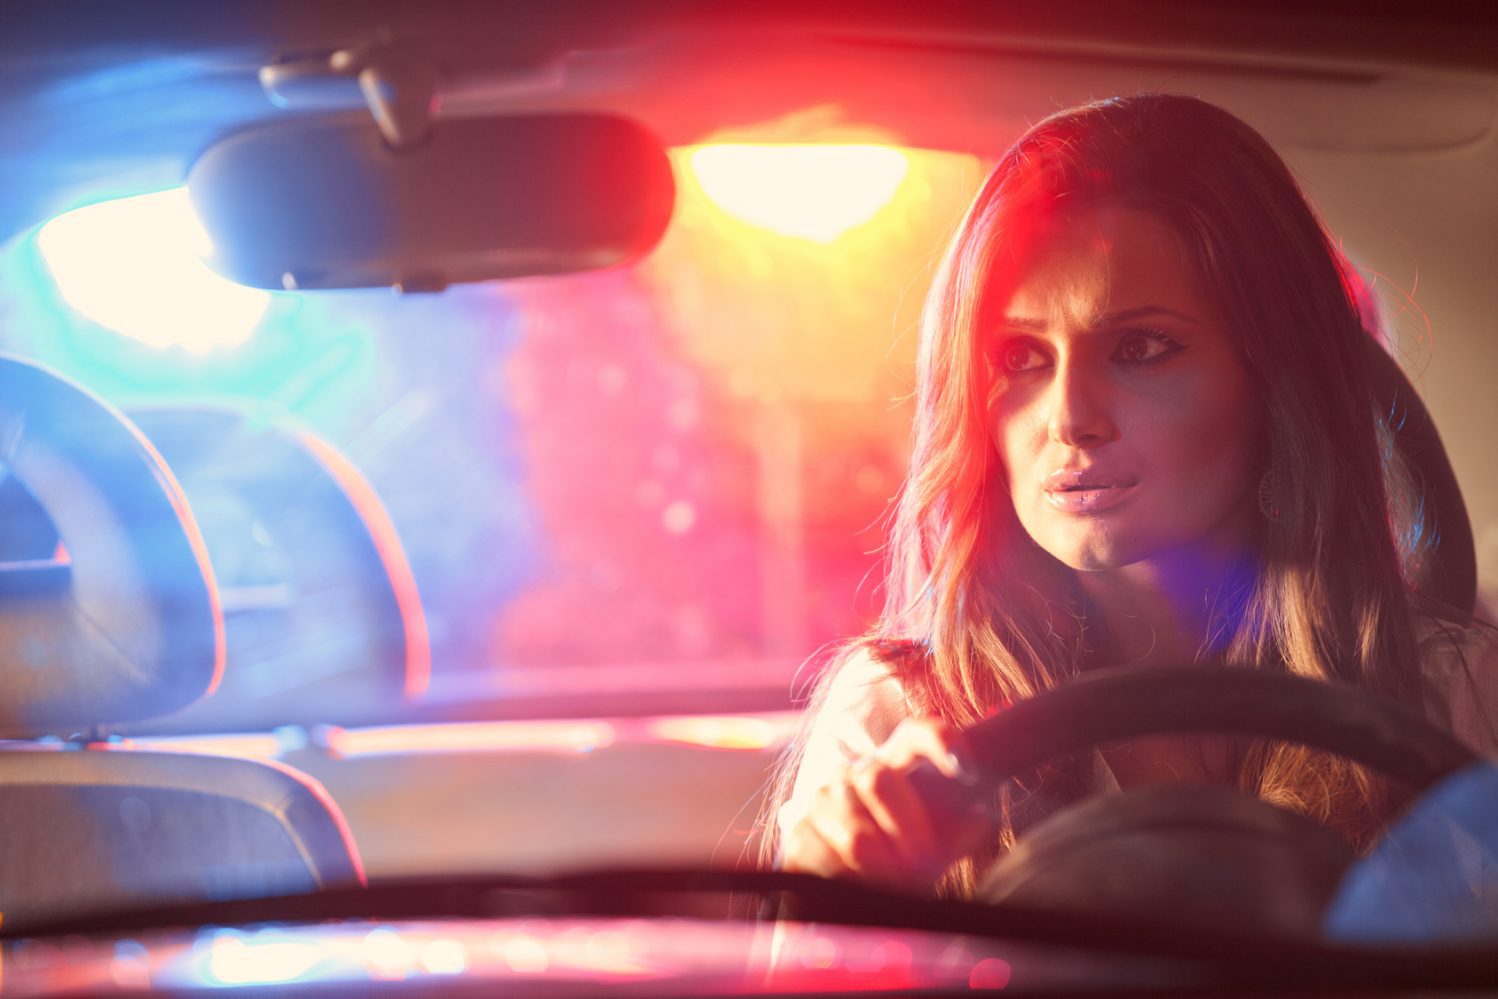 What to Do If You Are Pulled Over by Police